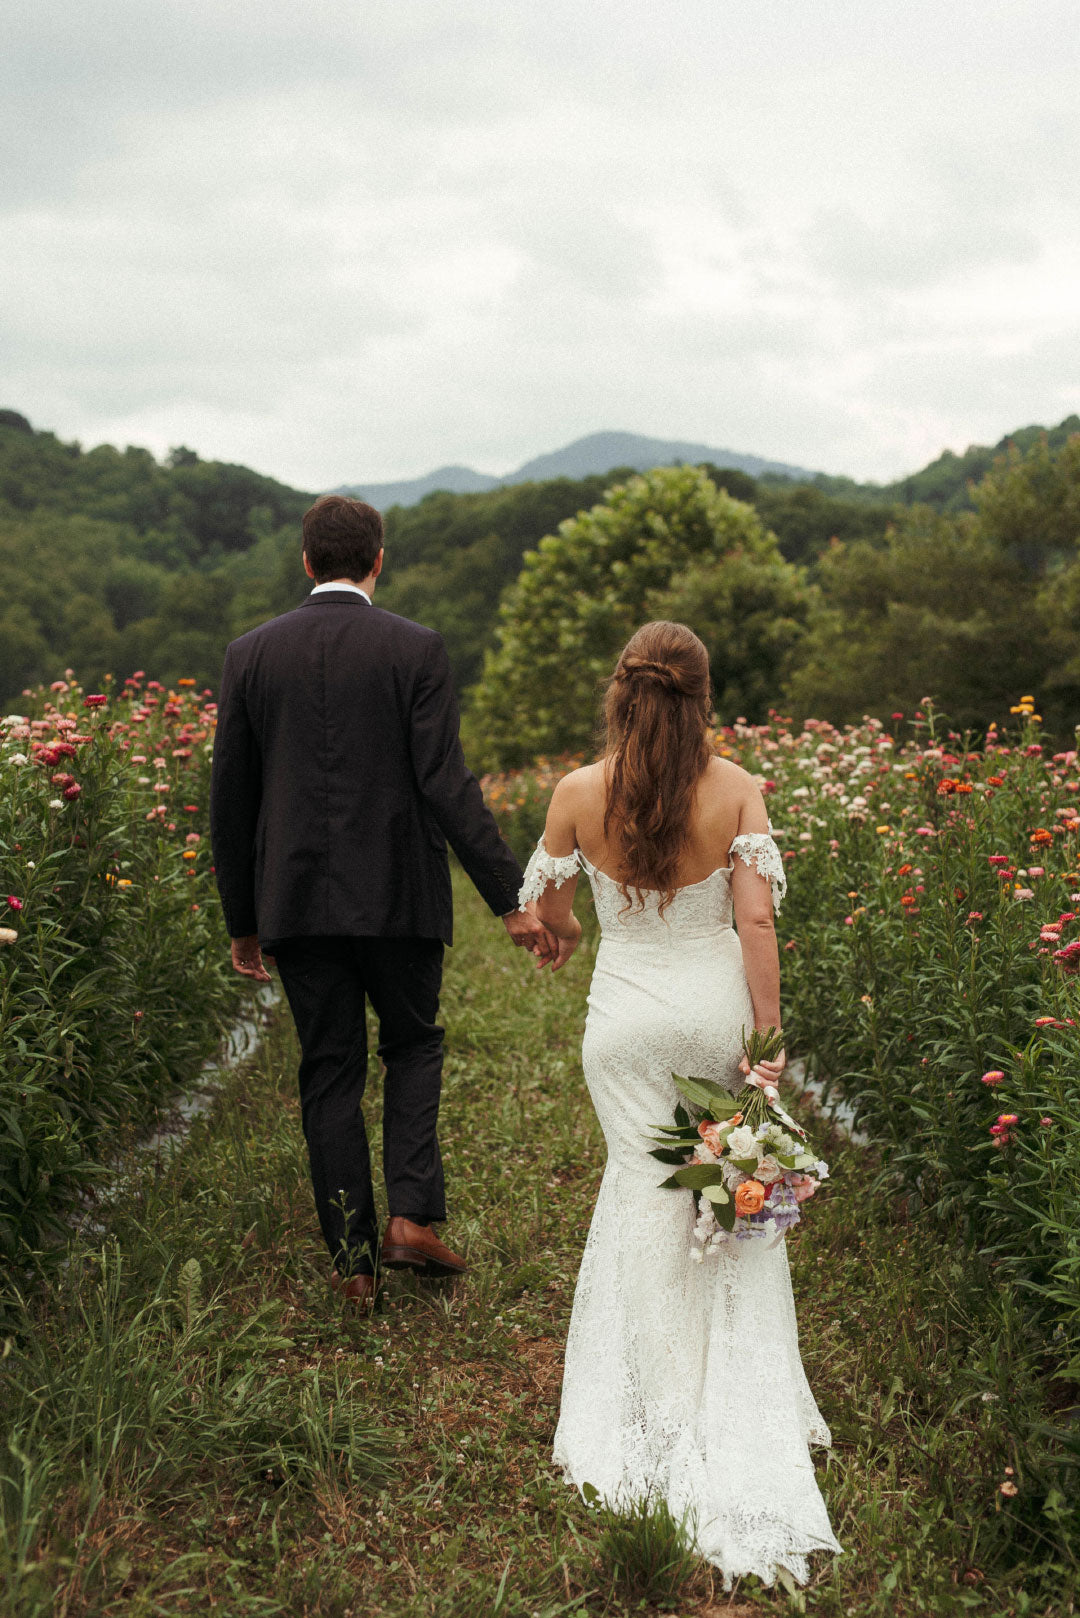 Bride and Groom in field after wedding ceremony